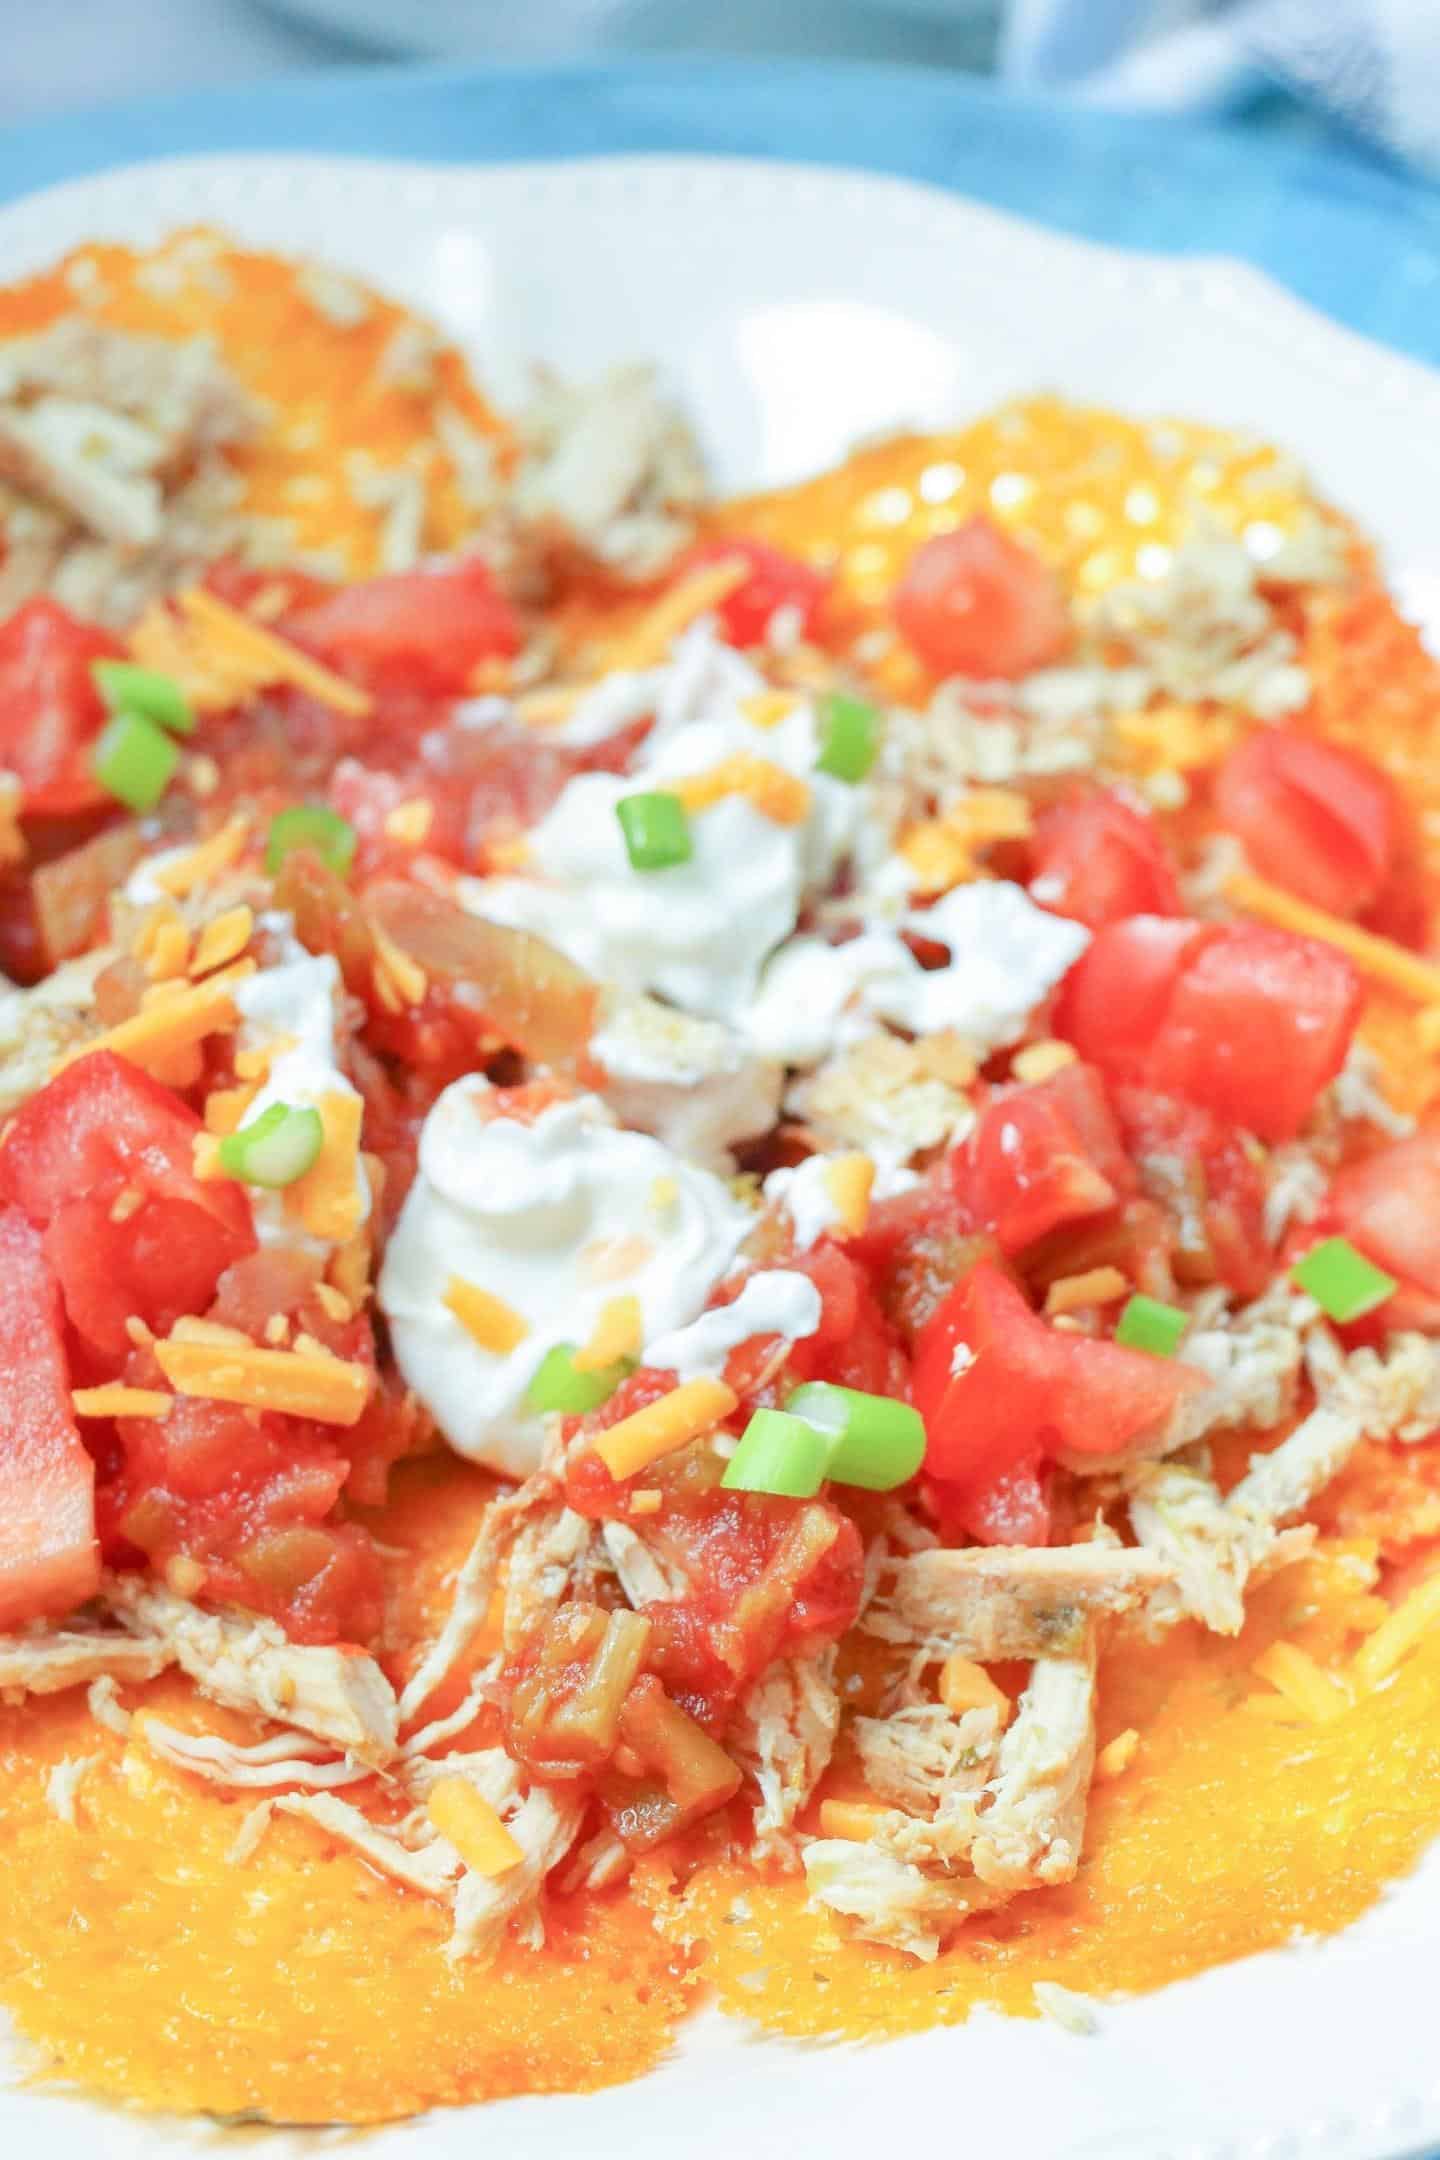 shredded chicken nachos with tomatoes and sour cream on top